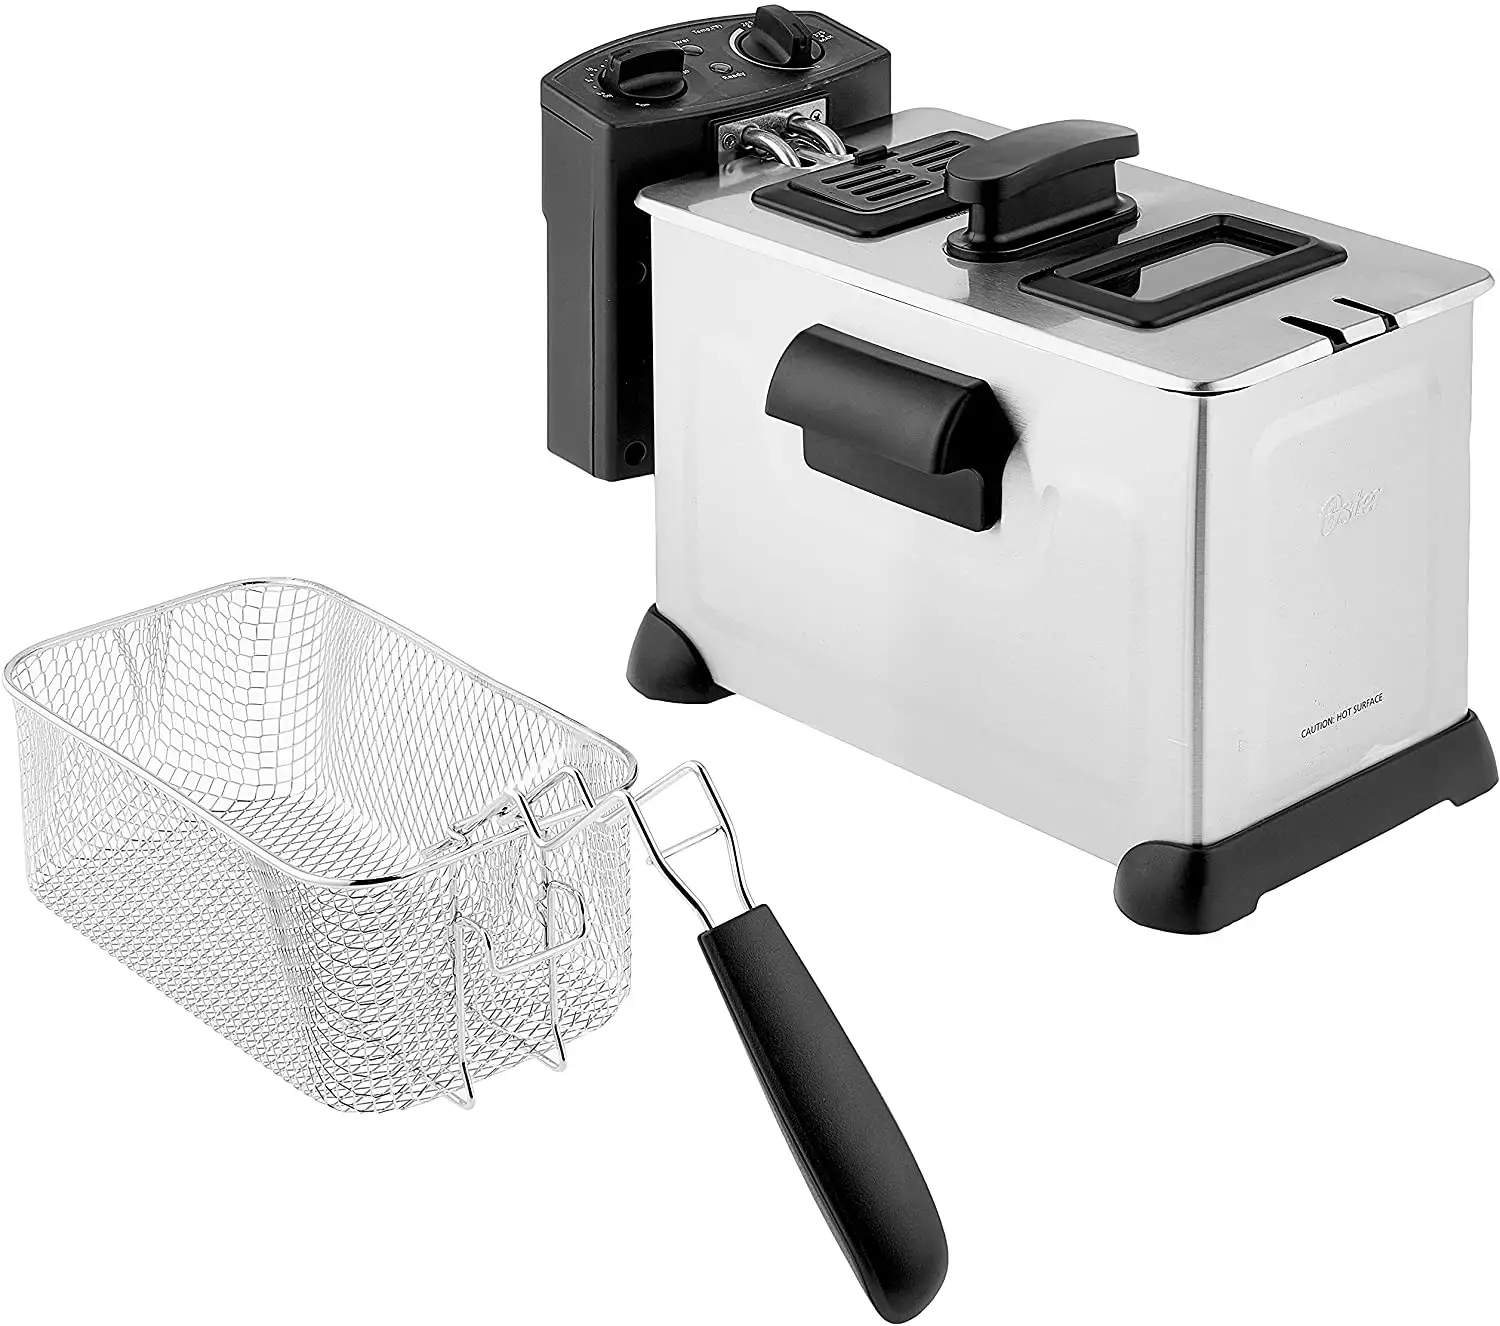 Oster Professional Style Stainless Steel Deep Fryer For A Large Family with odor filter, window and basket